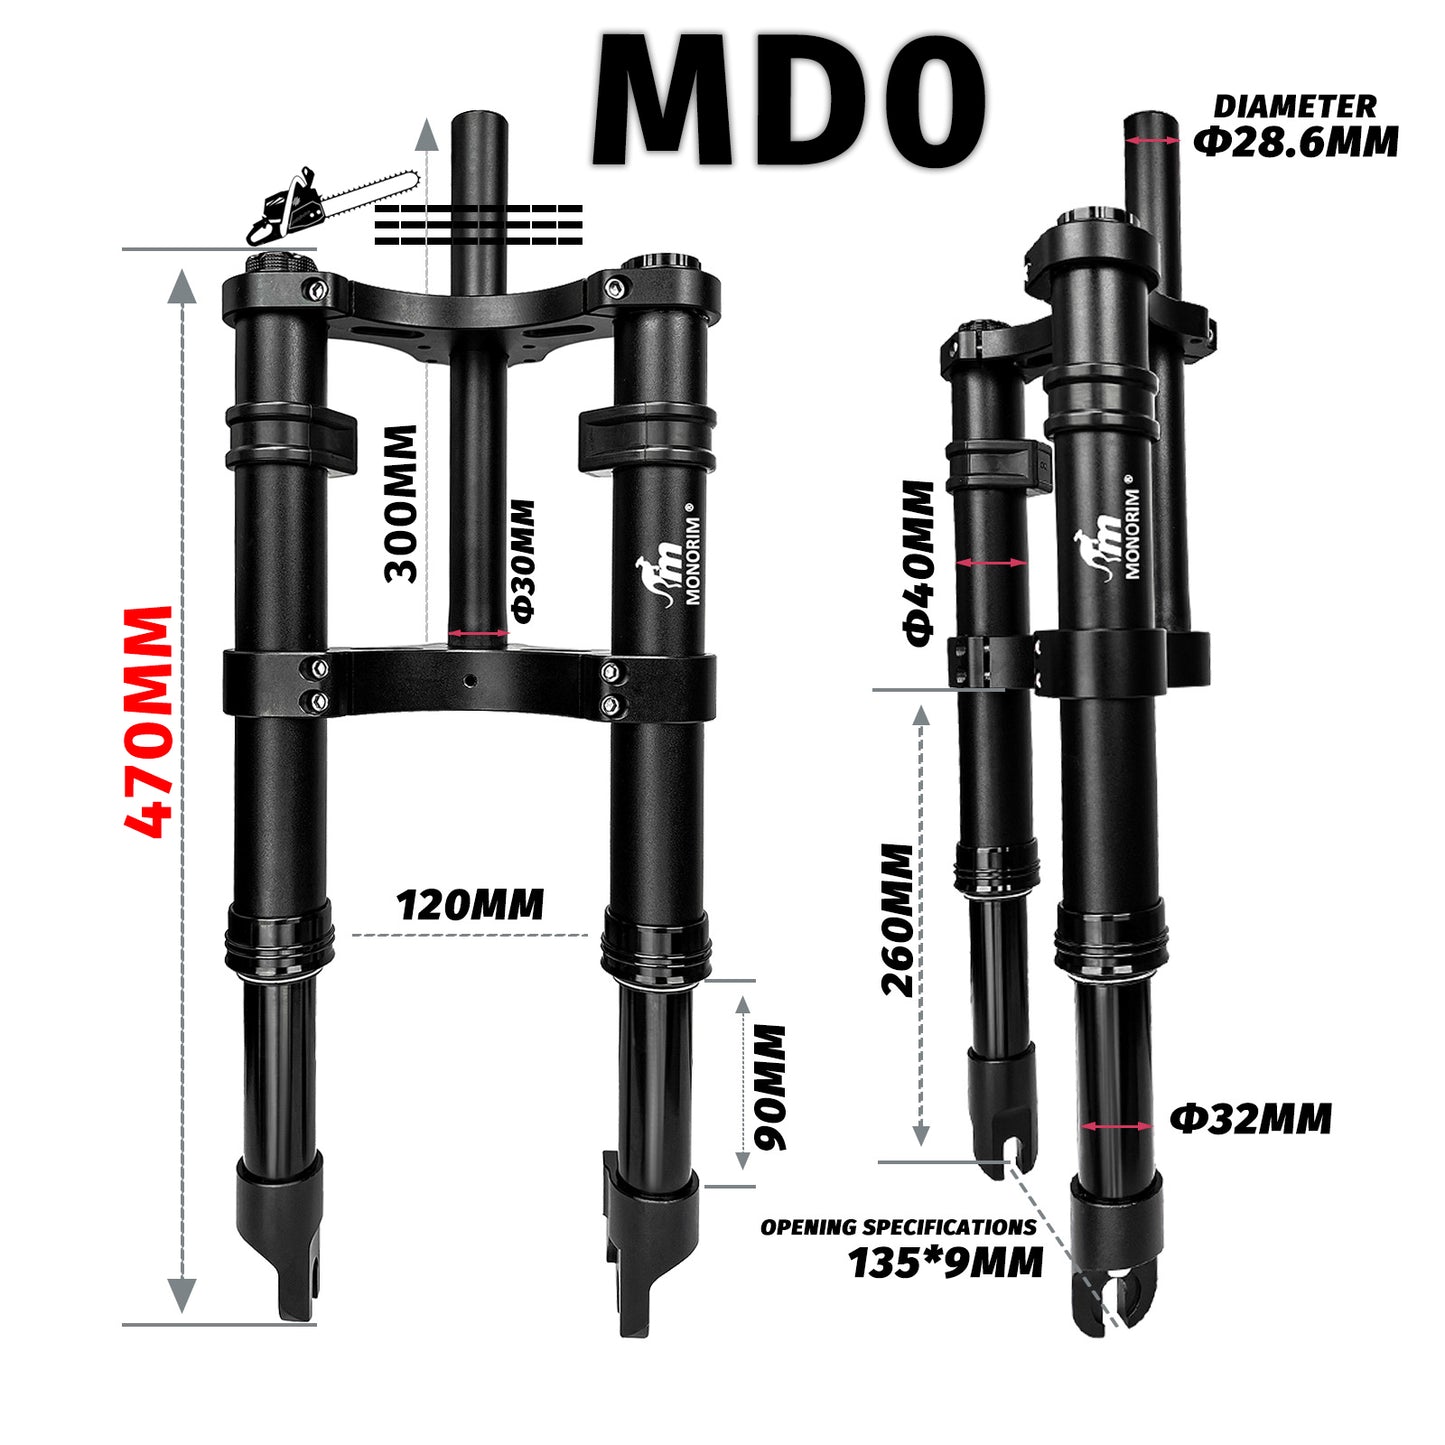 Monorim MB0/MD0 front air suspension modify great kit to be more safety and comfort for Mini Electric Bicycle